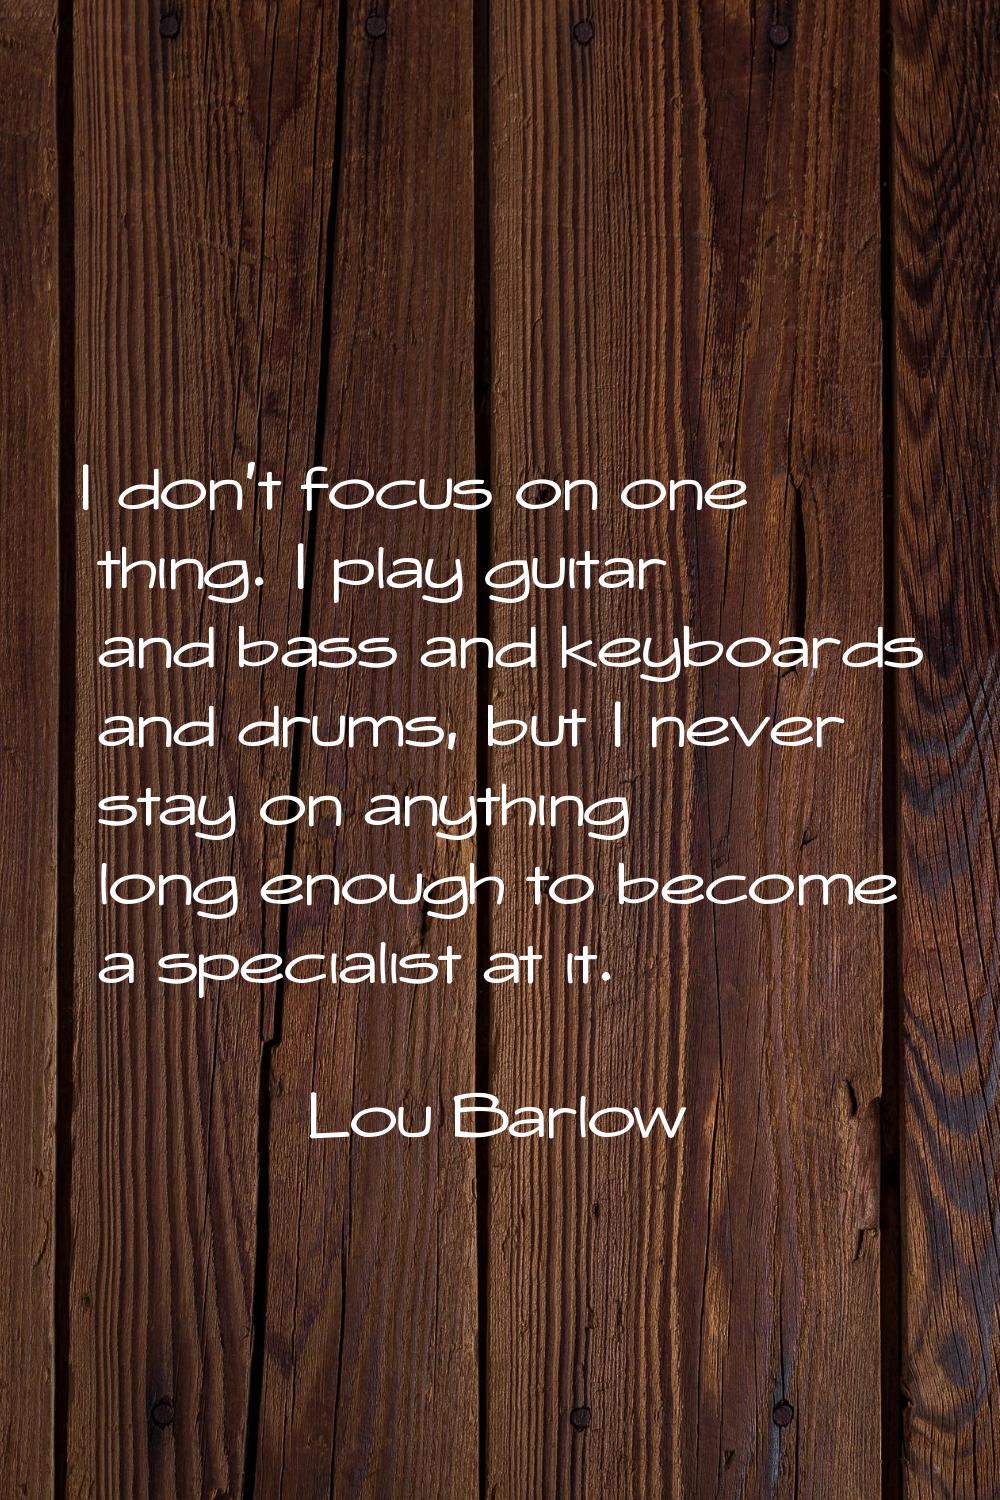 I don't focus on one thing. I play guitar and bass and keyboards and drums, but I never stay on any